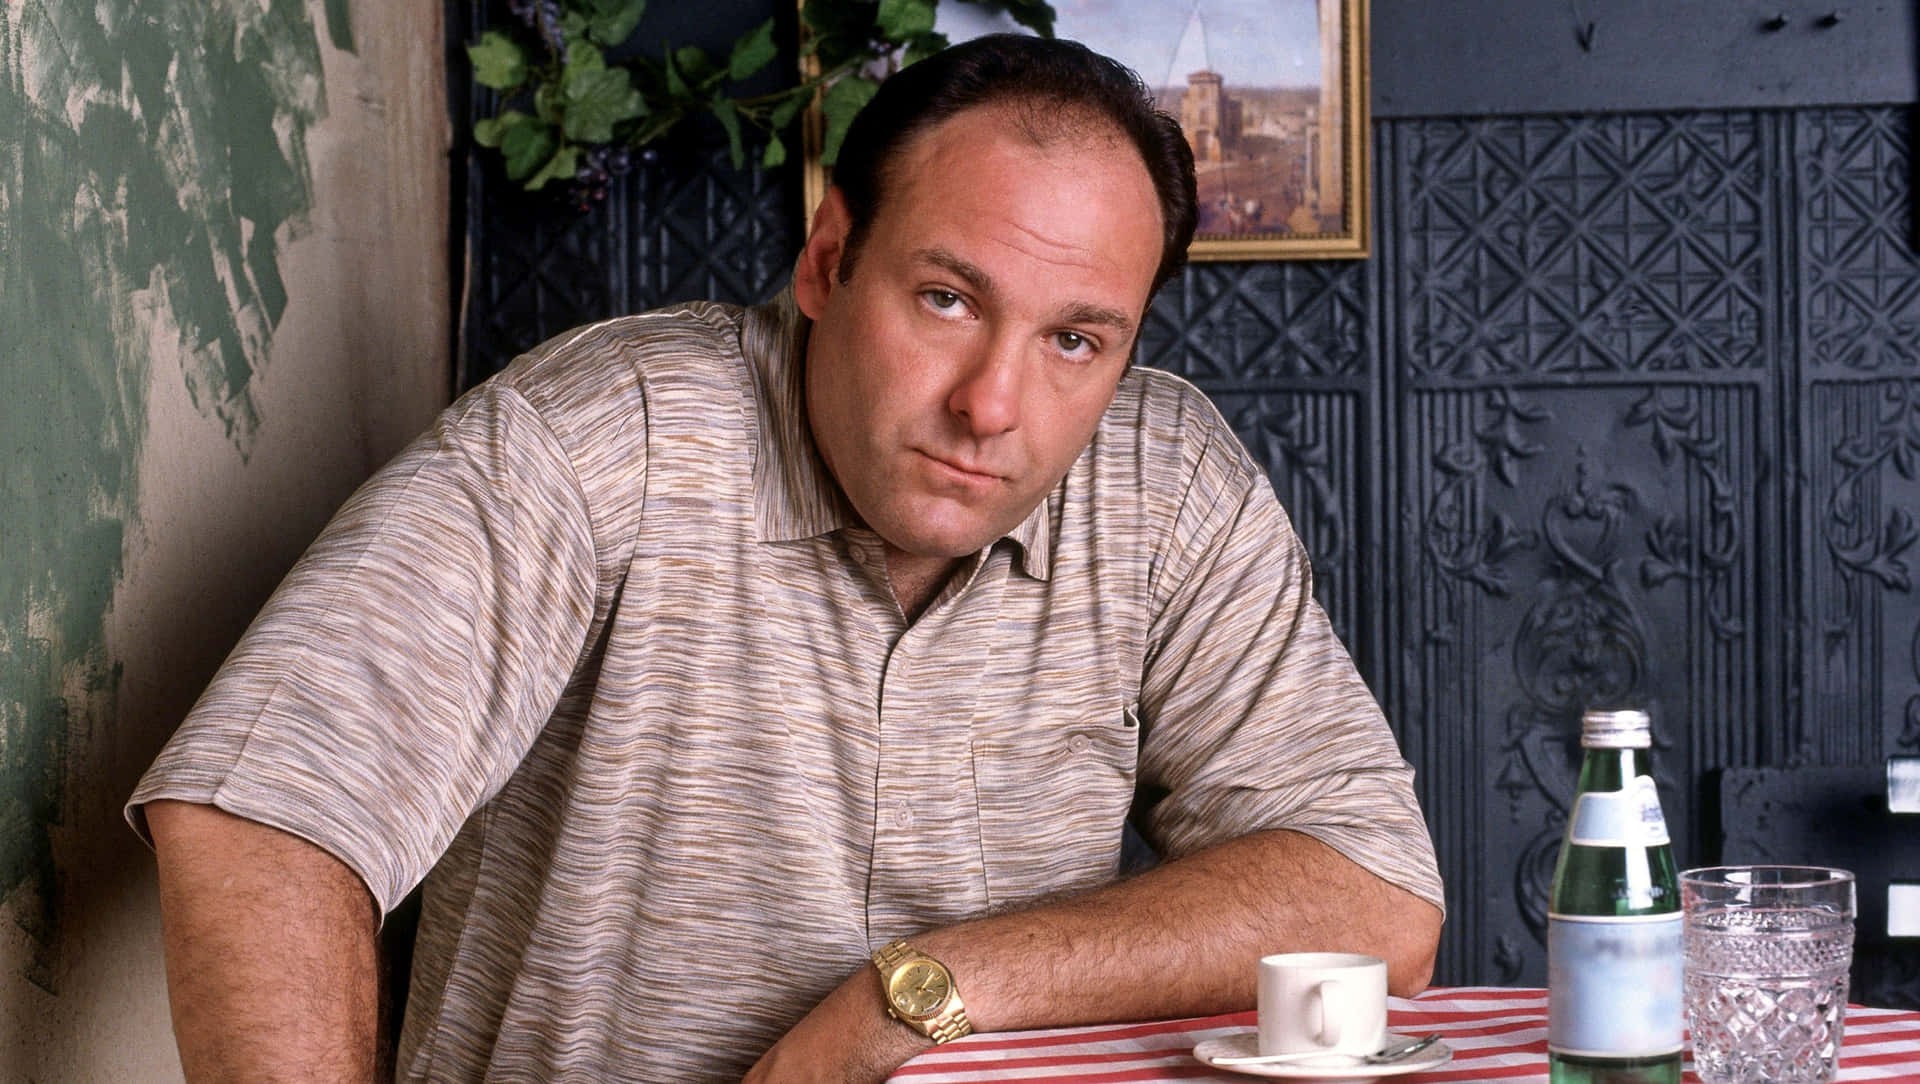 Jamesgandolfini Is An Actor Best Known For His Role As Tony Soprano In The Television Series 